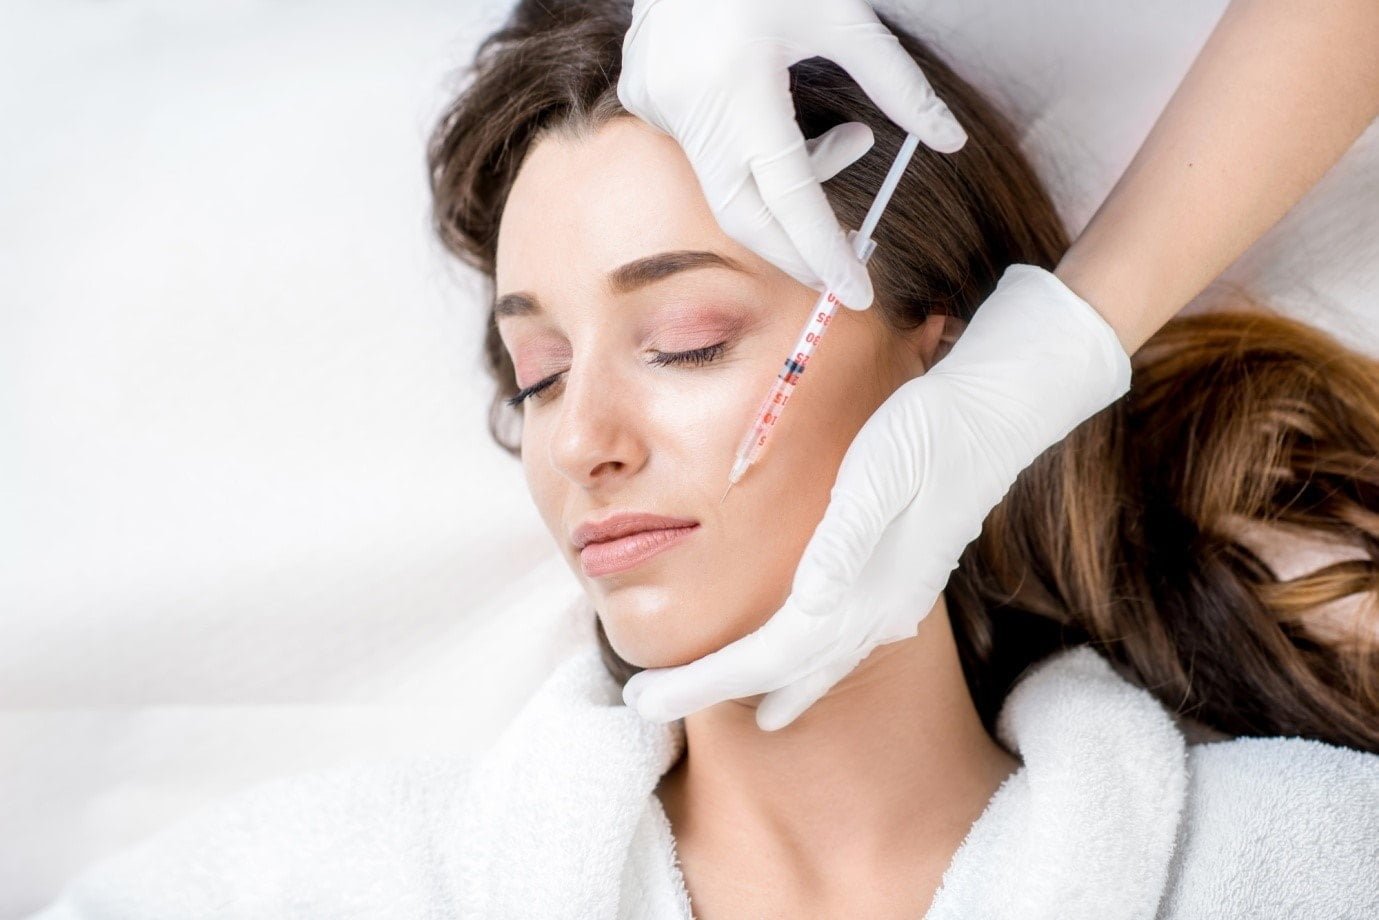 How To Find The Best Botox Training Courses